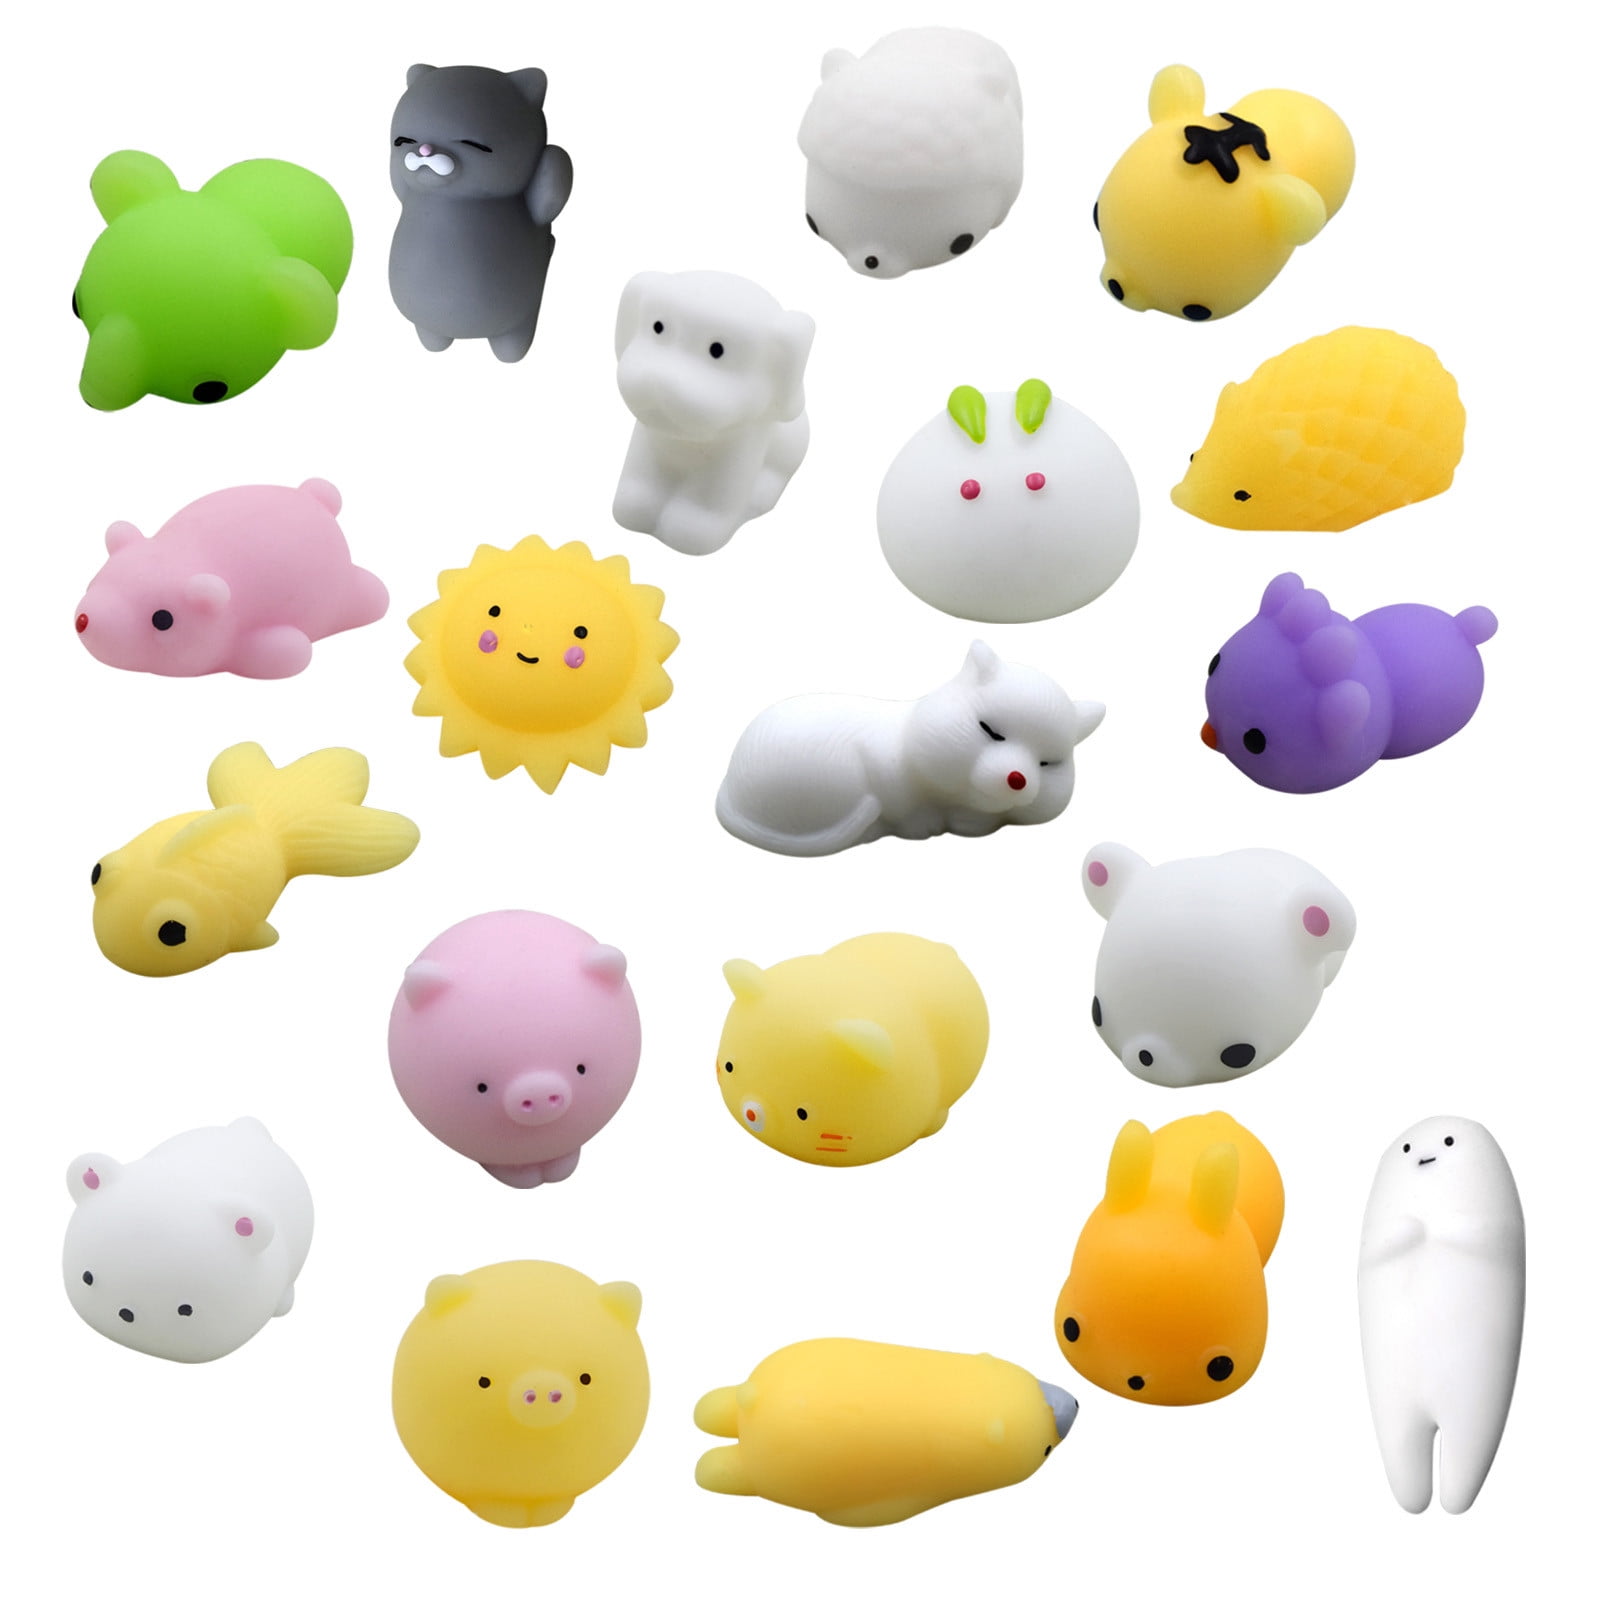 AOLIGE 6PCs Squishies Slow Rising Jumbo Kawaii Cut Poo Creamy Scent for Kids Party Toys Stress Reliever Toy 